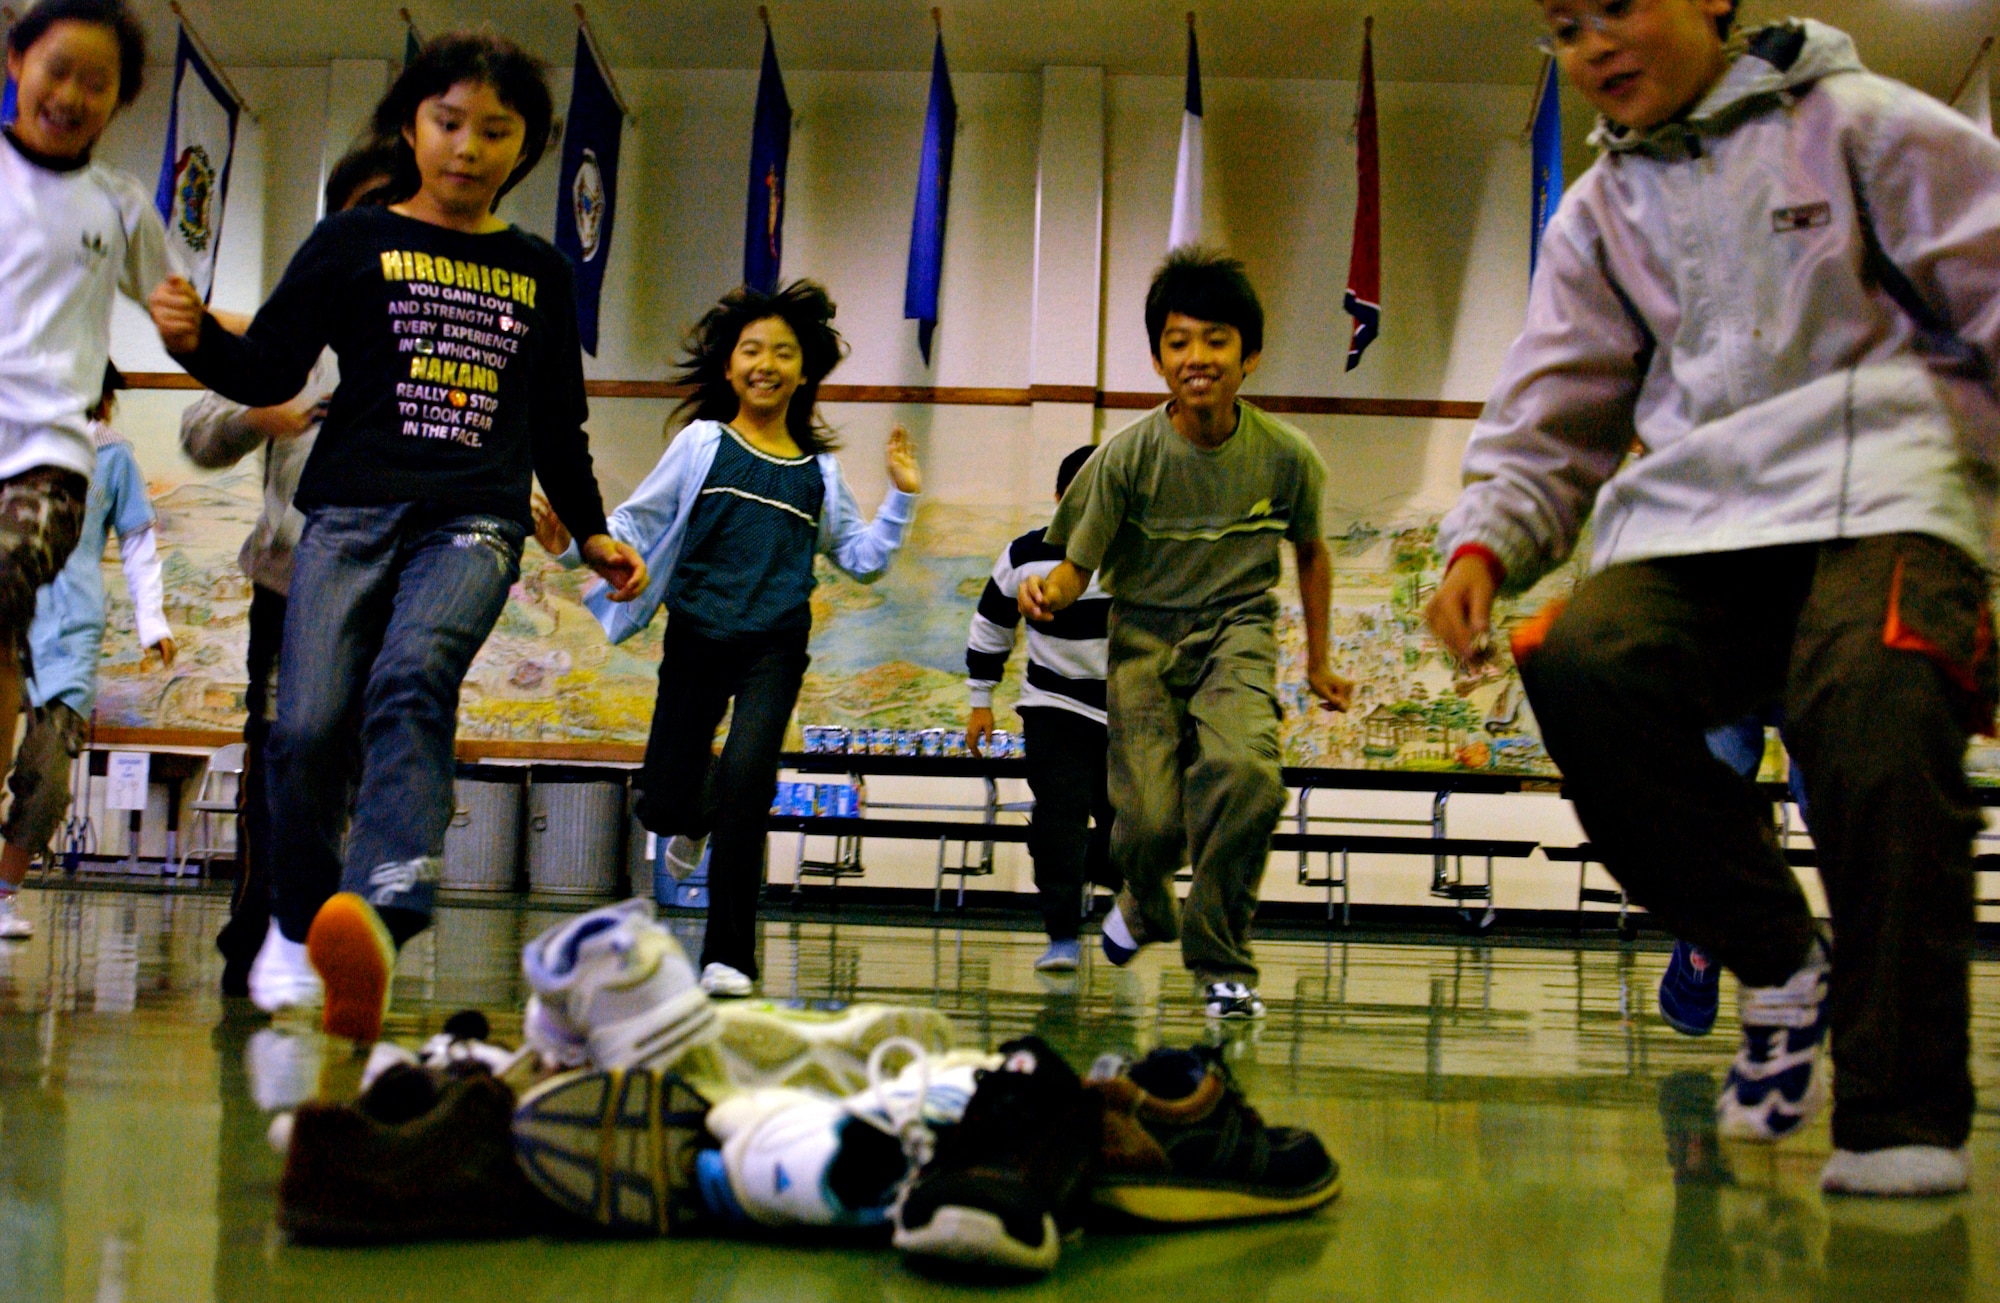 MISAWA AIR BASE, Japan -- Japanese elementary school students run to pickup a shoe as part of a game to meet and interact with American students at Sollars Elementary School, Oct. 20, 2007.  The Japanese children came from three elementary schools in Oirase Town as part of a cultural exchange program that has been running for 15 years.
(U.S. Air Force photo by Airman 1st Class Eric Harris)(RELEASED)